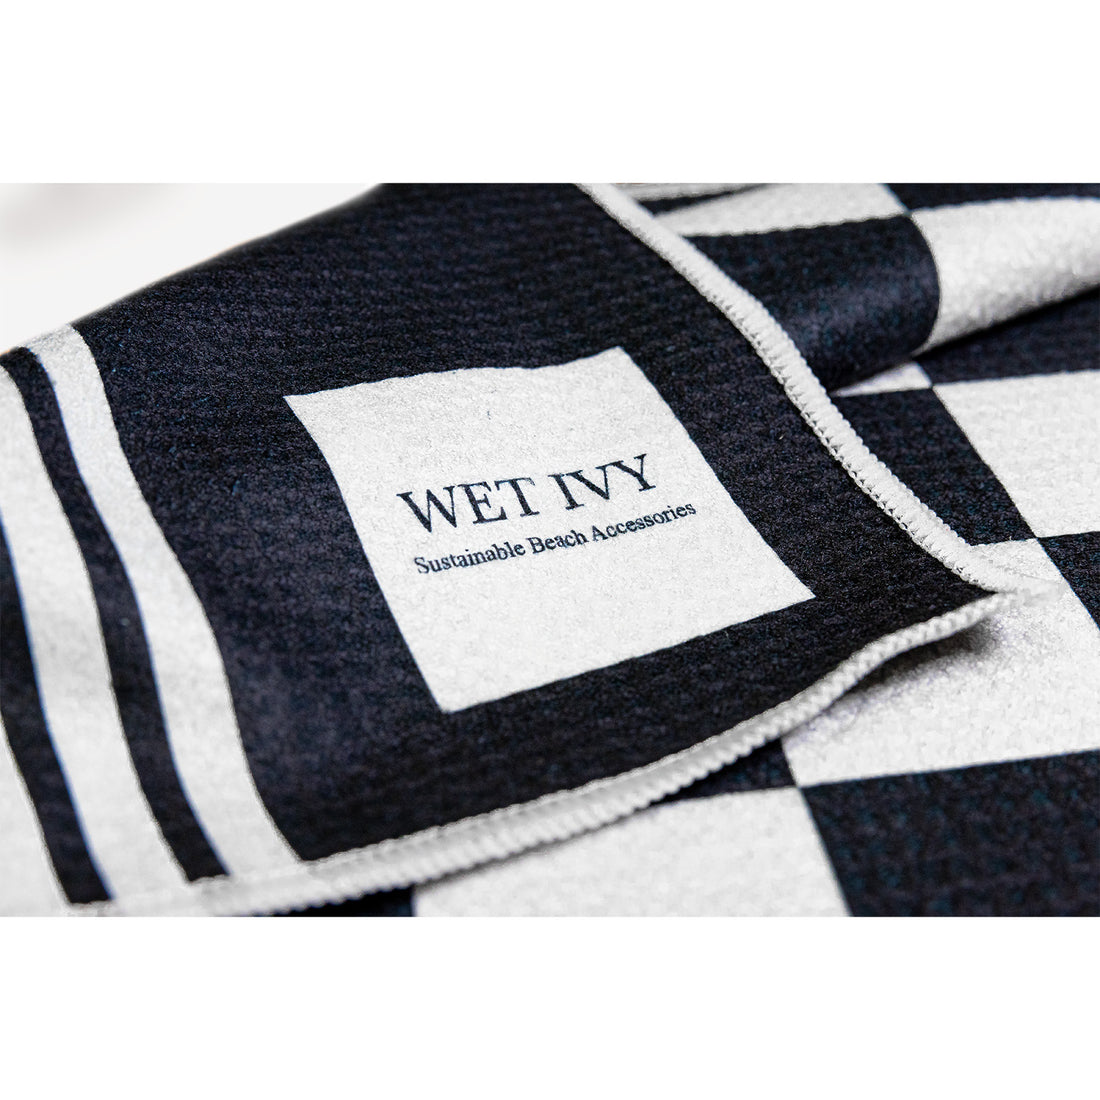 sand free beach towels - towels for sale - wet ivy sustainable beach accessories - travel towels - towels for camping - black and white checkered towels - swimming towels - pool towels - lightweight travel towels - quick dry microfiber towels - antimicrobial towels